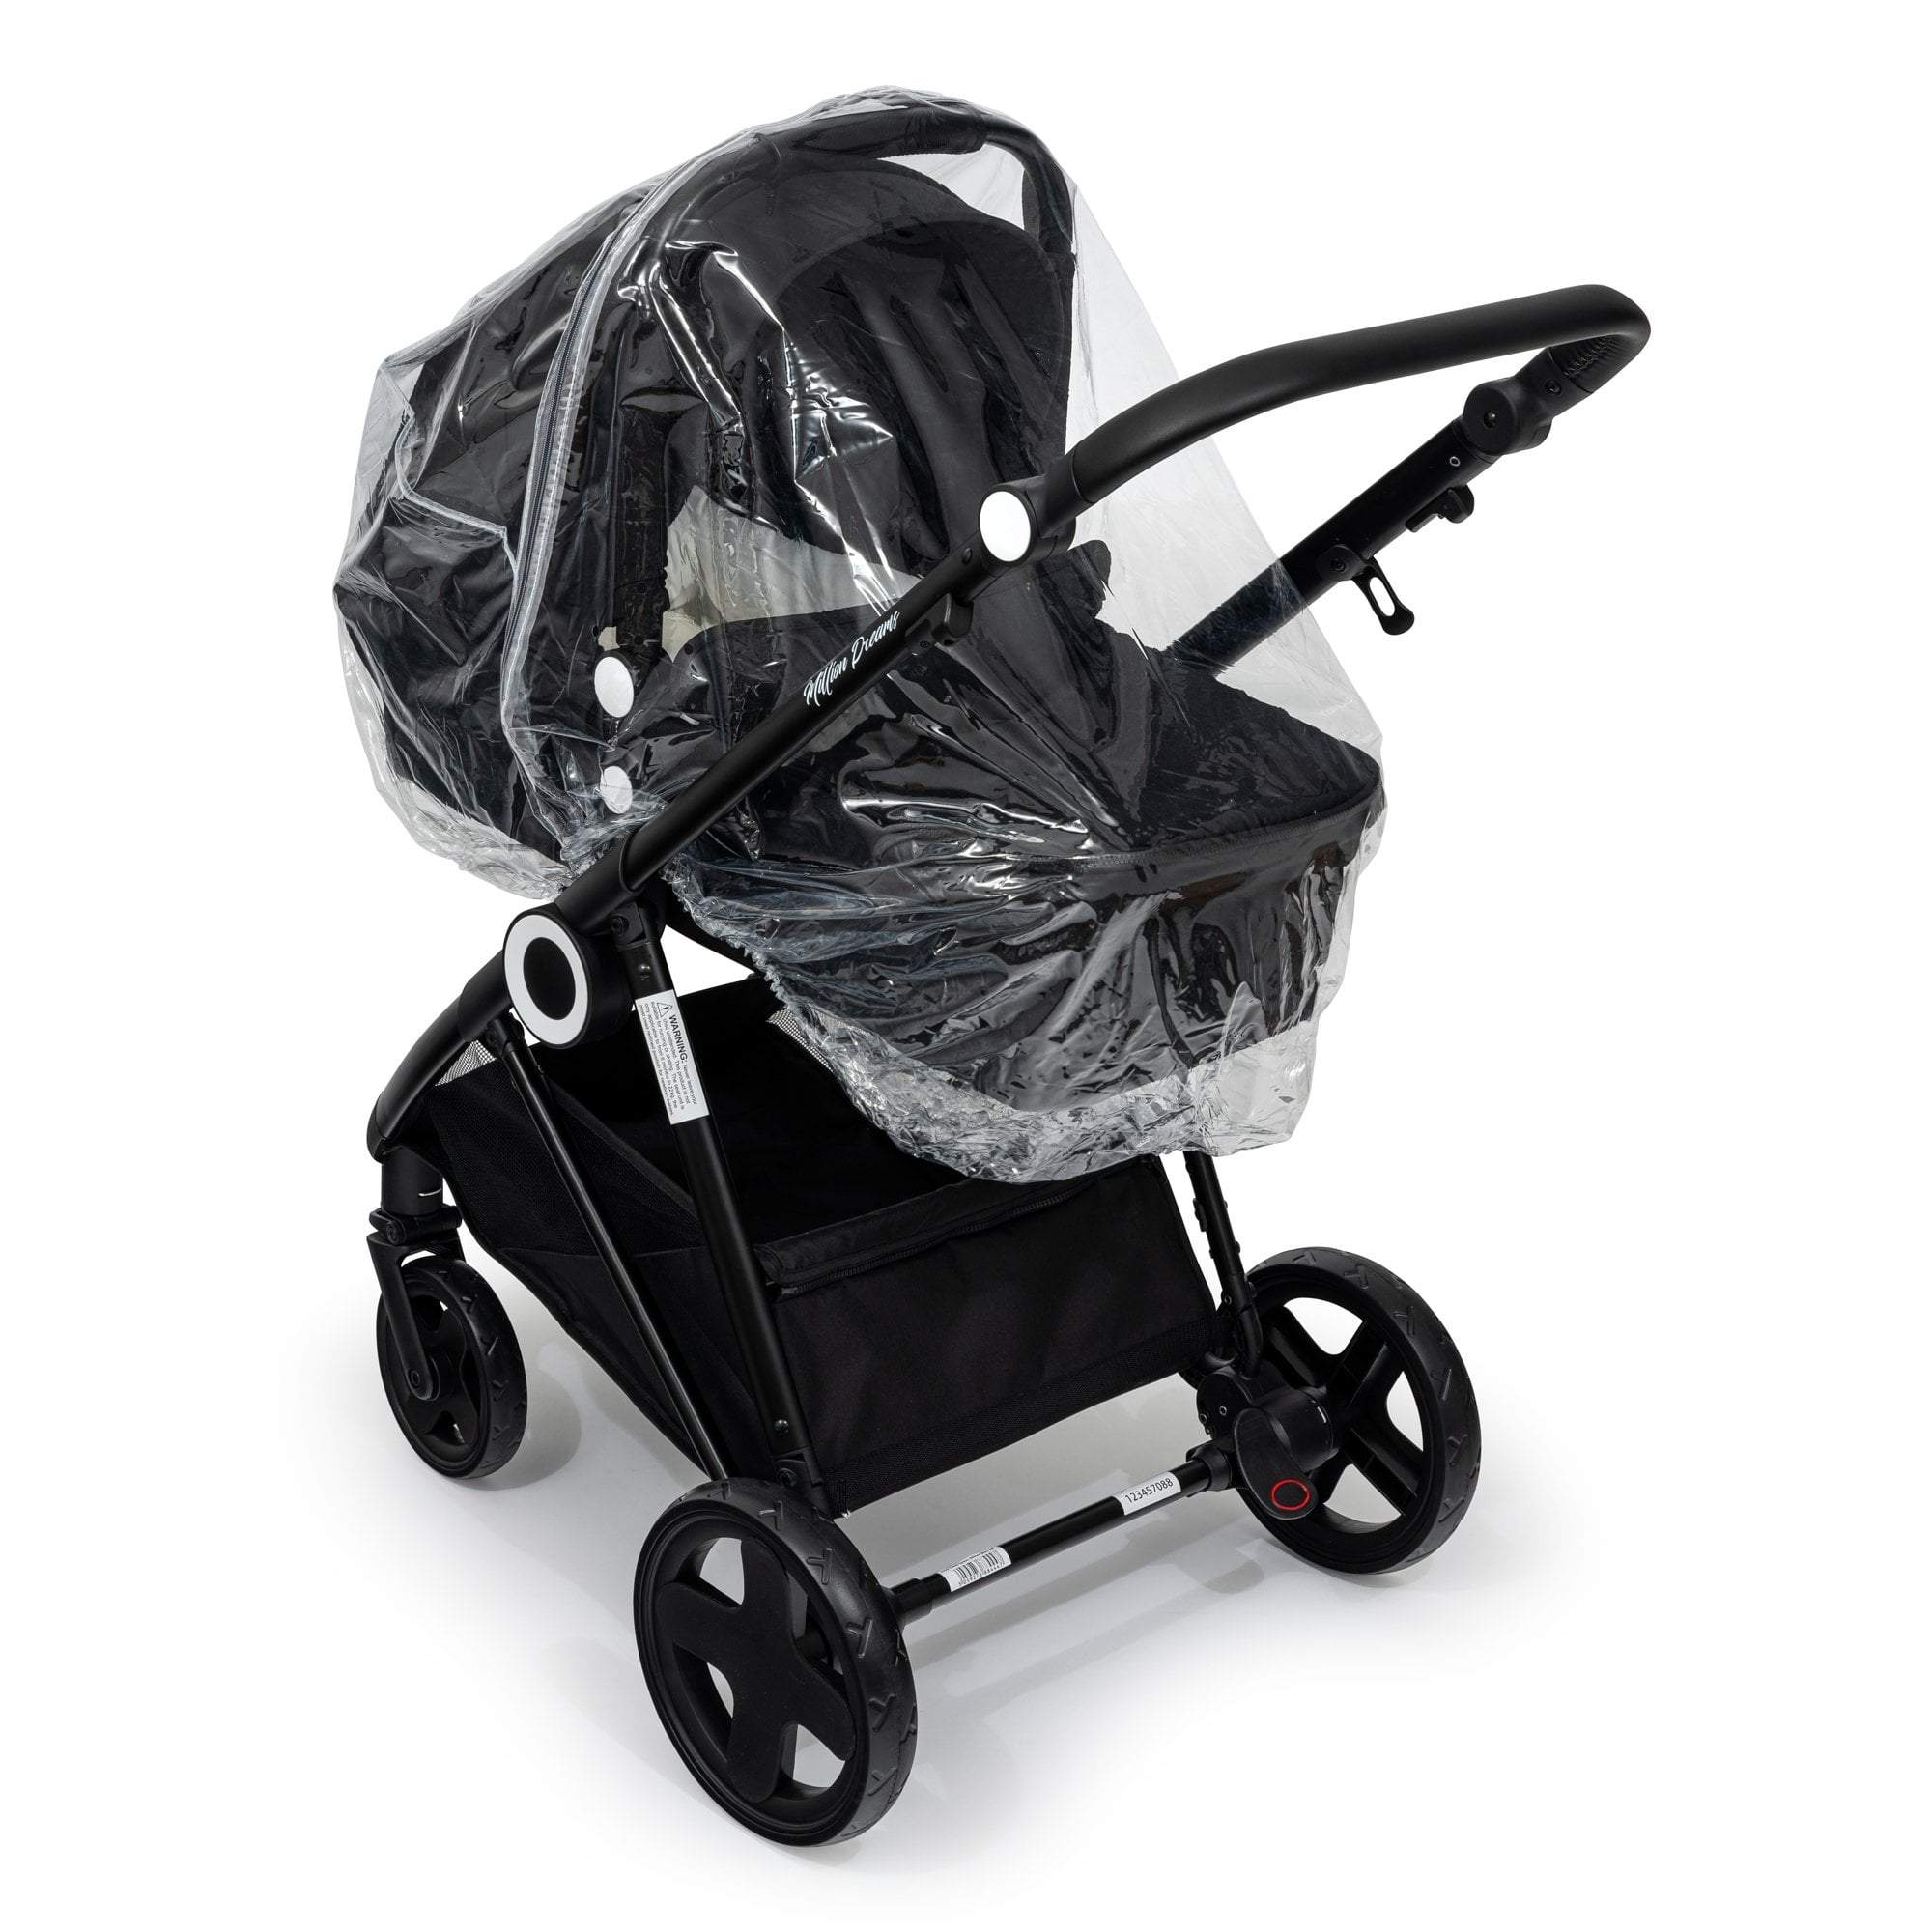 Carrycot Raincover Compatible With Casual - Fits All Models - For Your Little One